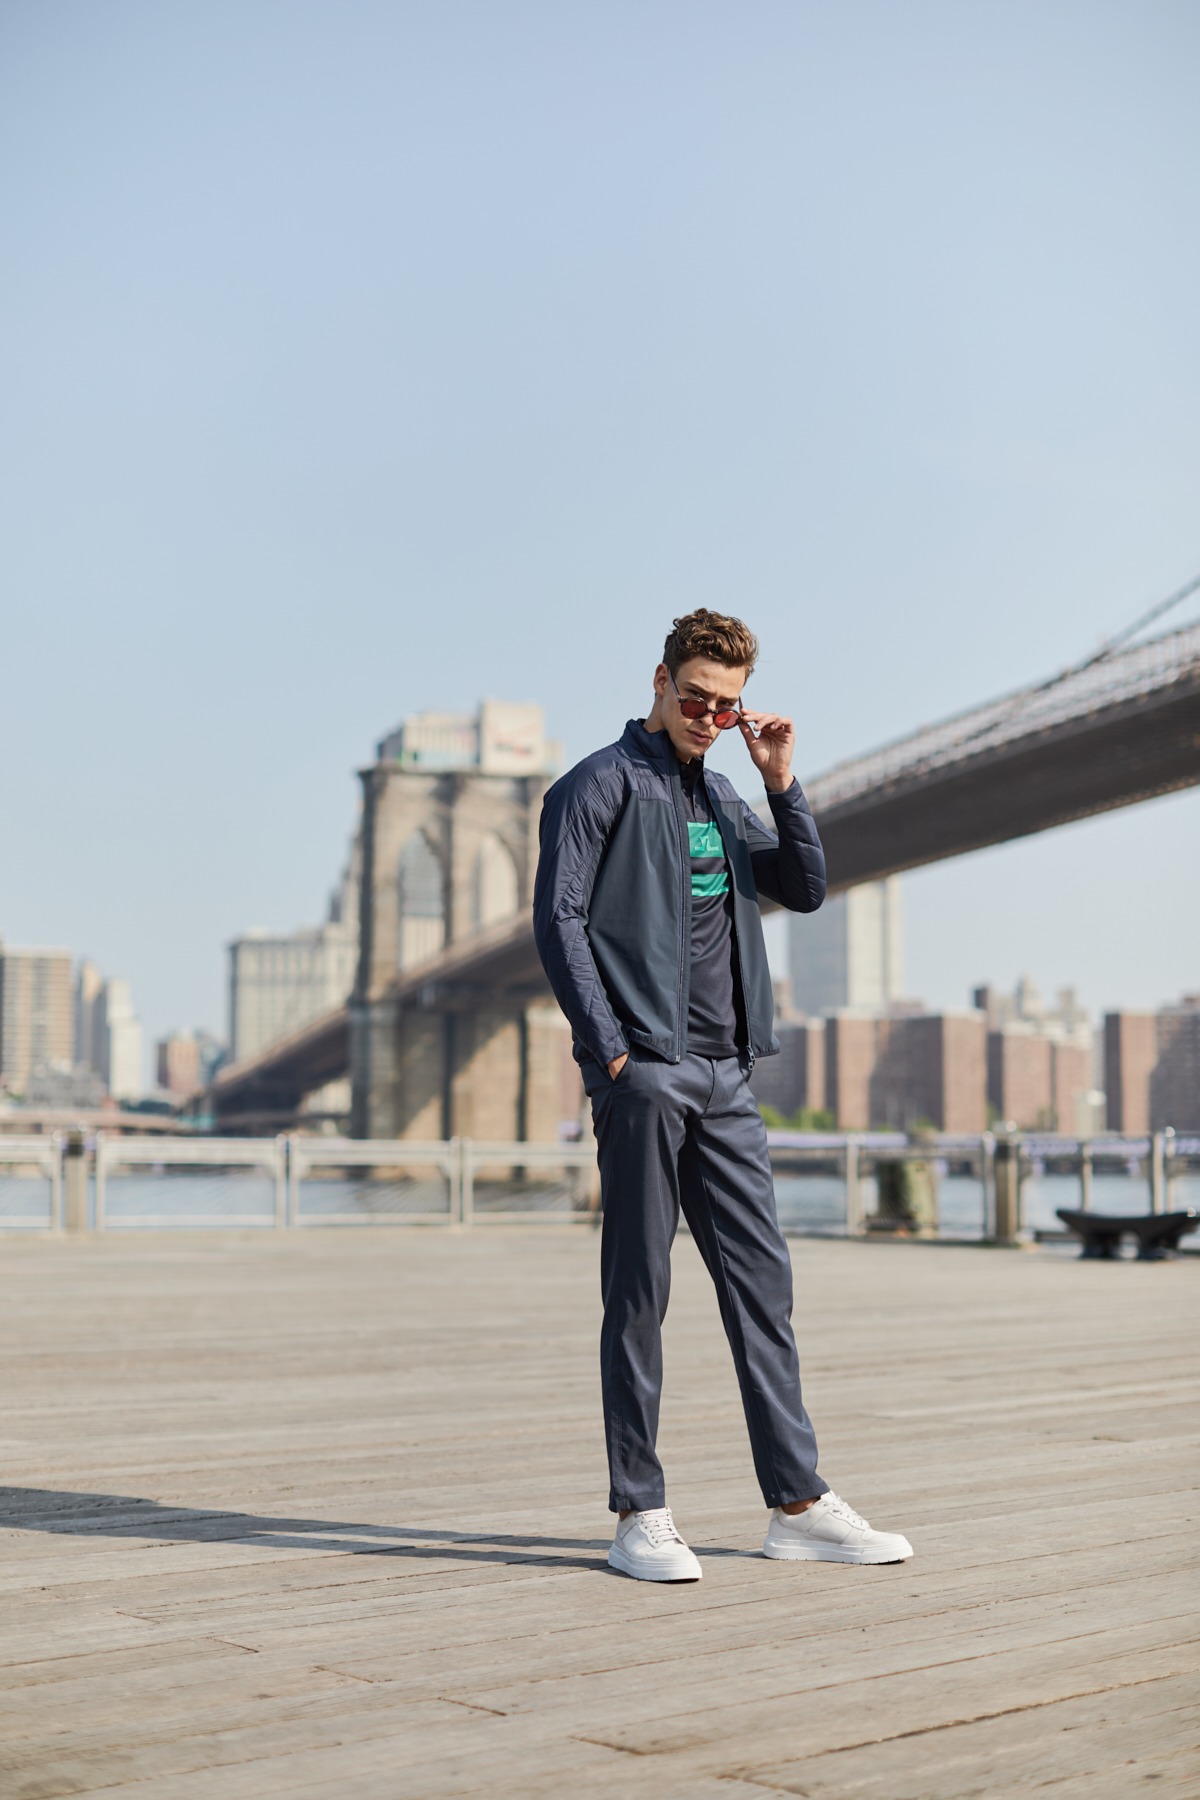 justin petzschke hugo boss new york (12 images) by Mike Meyer Photography